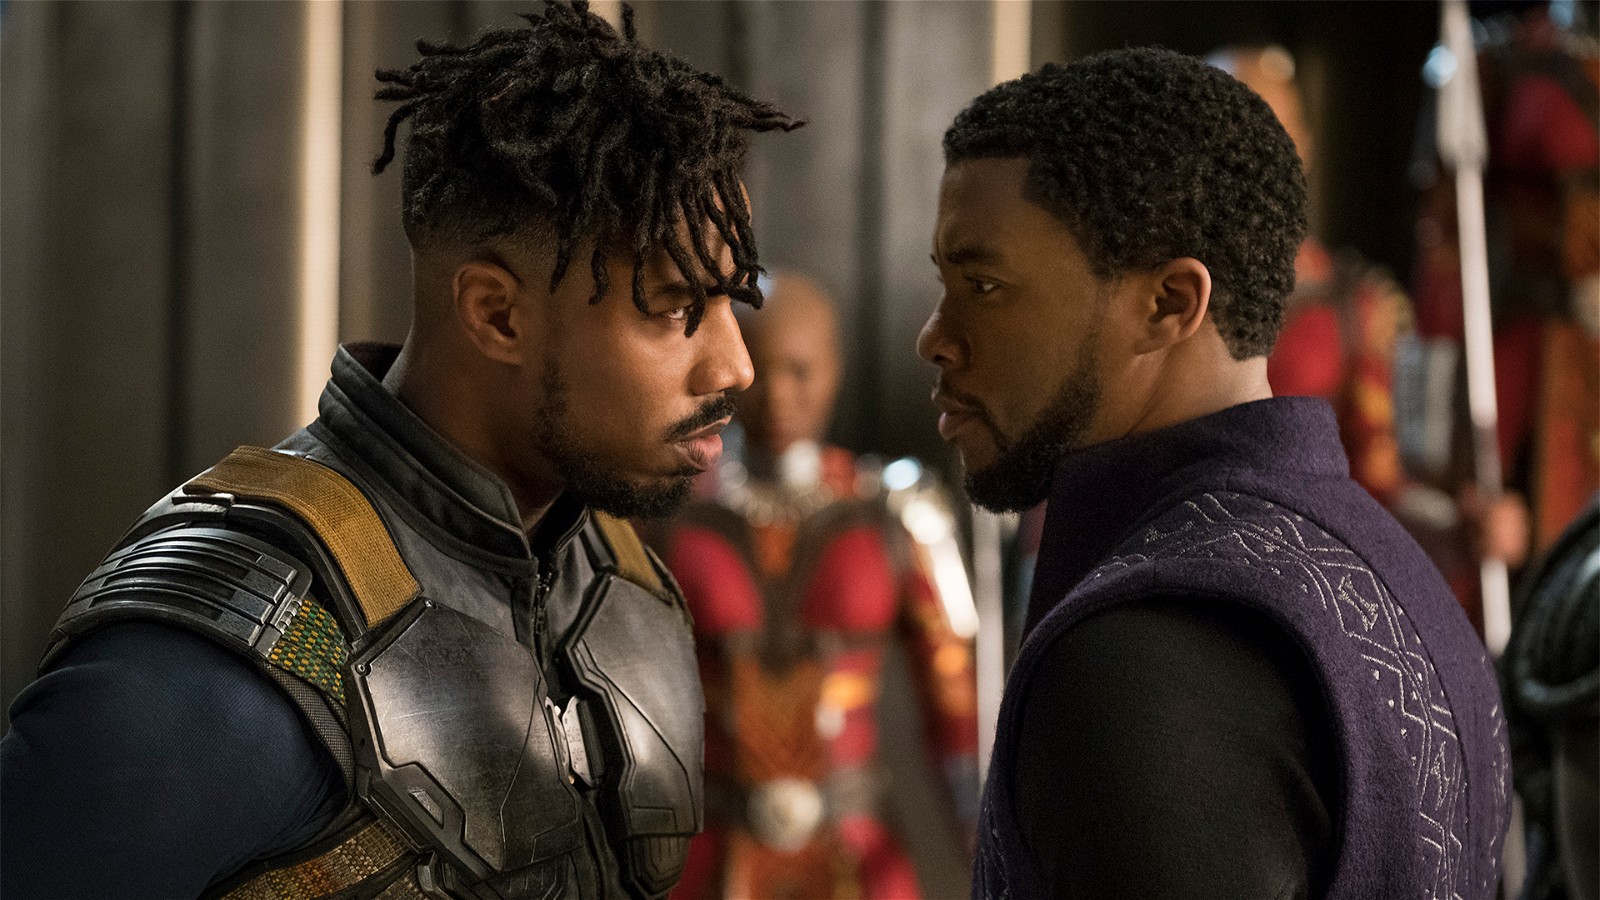 Chadwick Boseman and Michael B. Jordan in a still from Black Panther